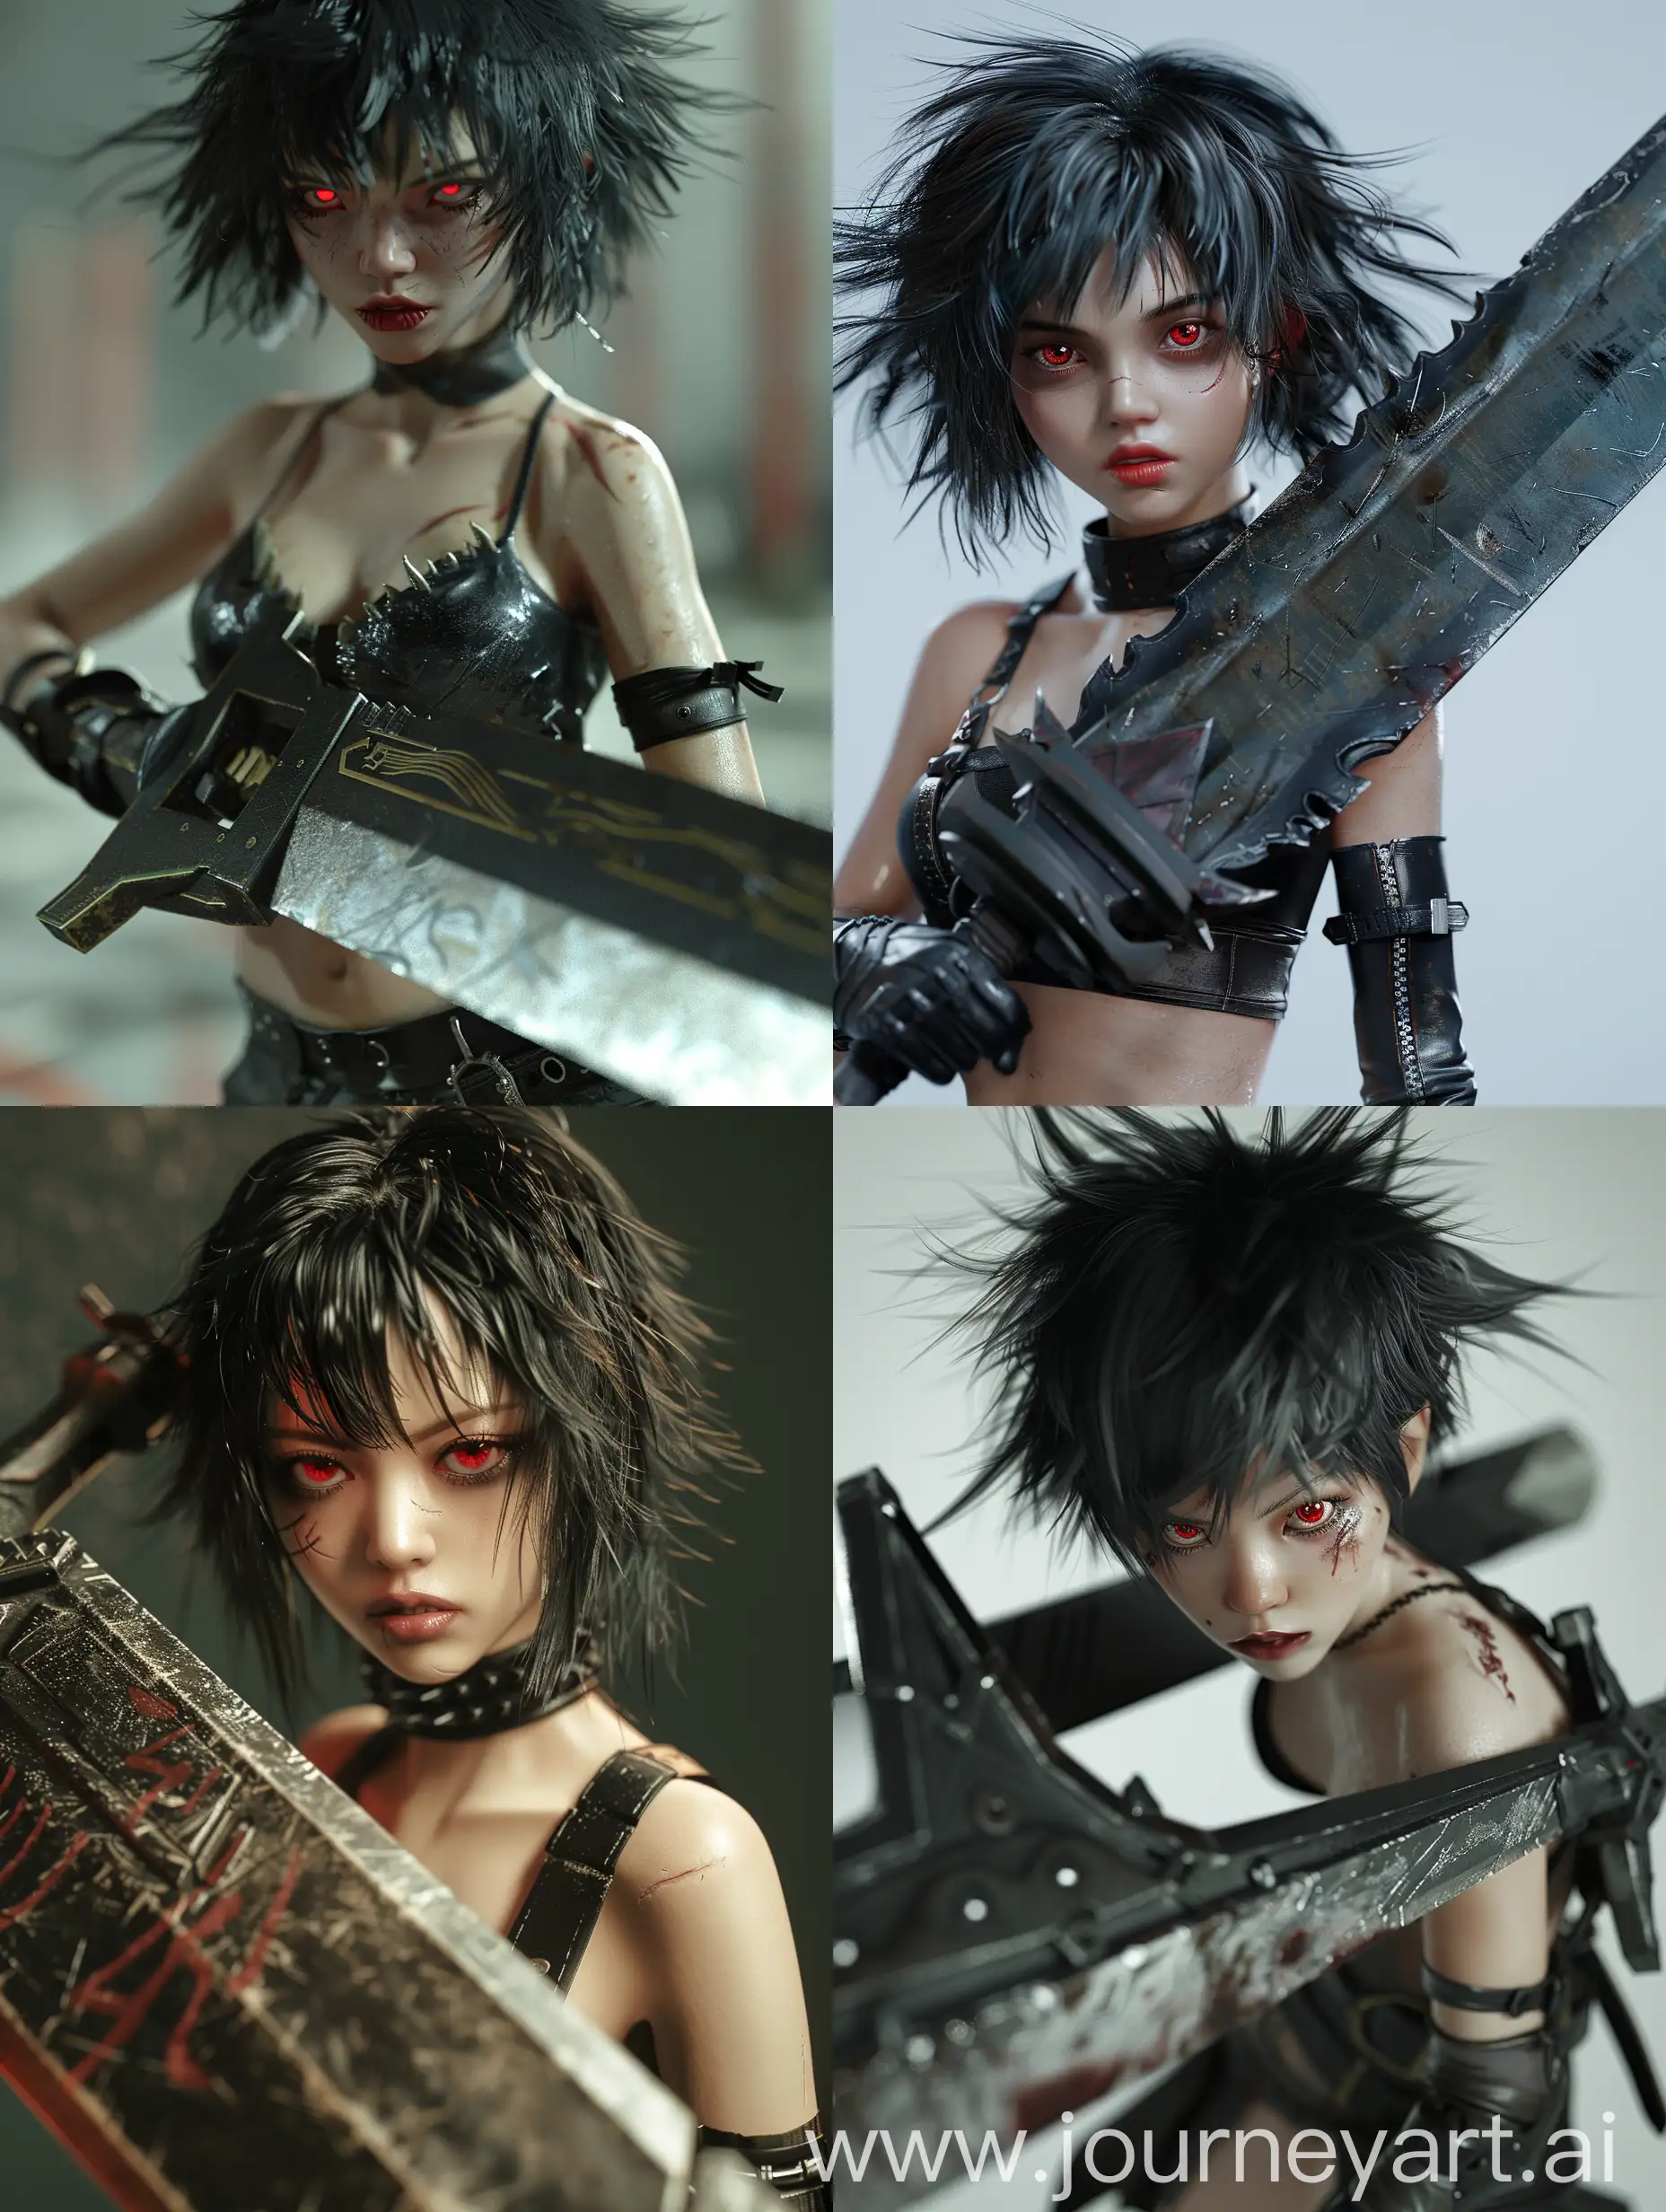 3D, Render, Final Fantasy Game Style, Brutal Young Woman, Asian Appearance, Muscular Physique, Red Eyes, Black Hair, Short Messy Hairstyle, Dark Makeup, Black Combat Leather Clothes, Futuristic Huge Sword in Hand, Fighting Pose, Grin on Face